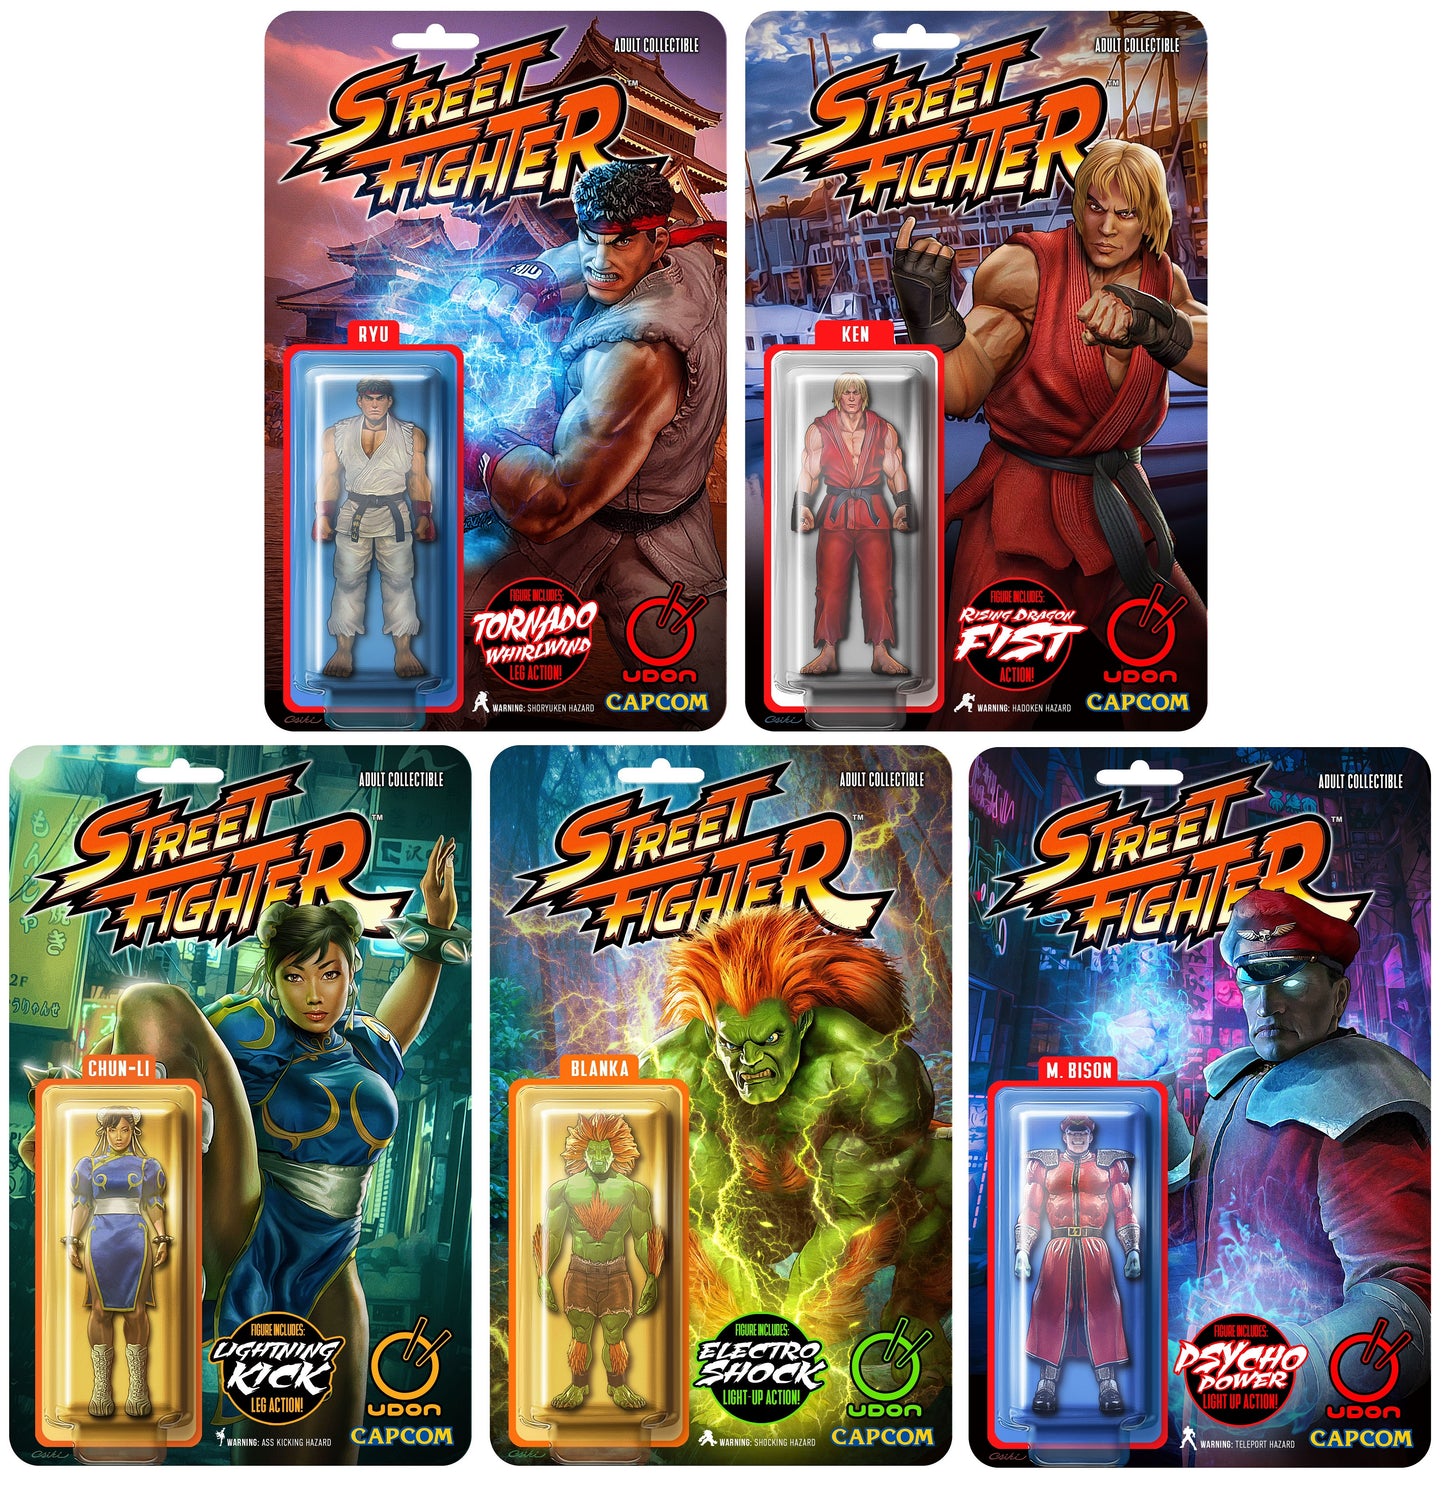 STREET FIGHTER MASTERS: CHUN-LI #1 ROB CSIKI 5 COVER ACTION FIGURE VARIANT SET EACH LIMITED TO 300 COPIES